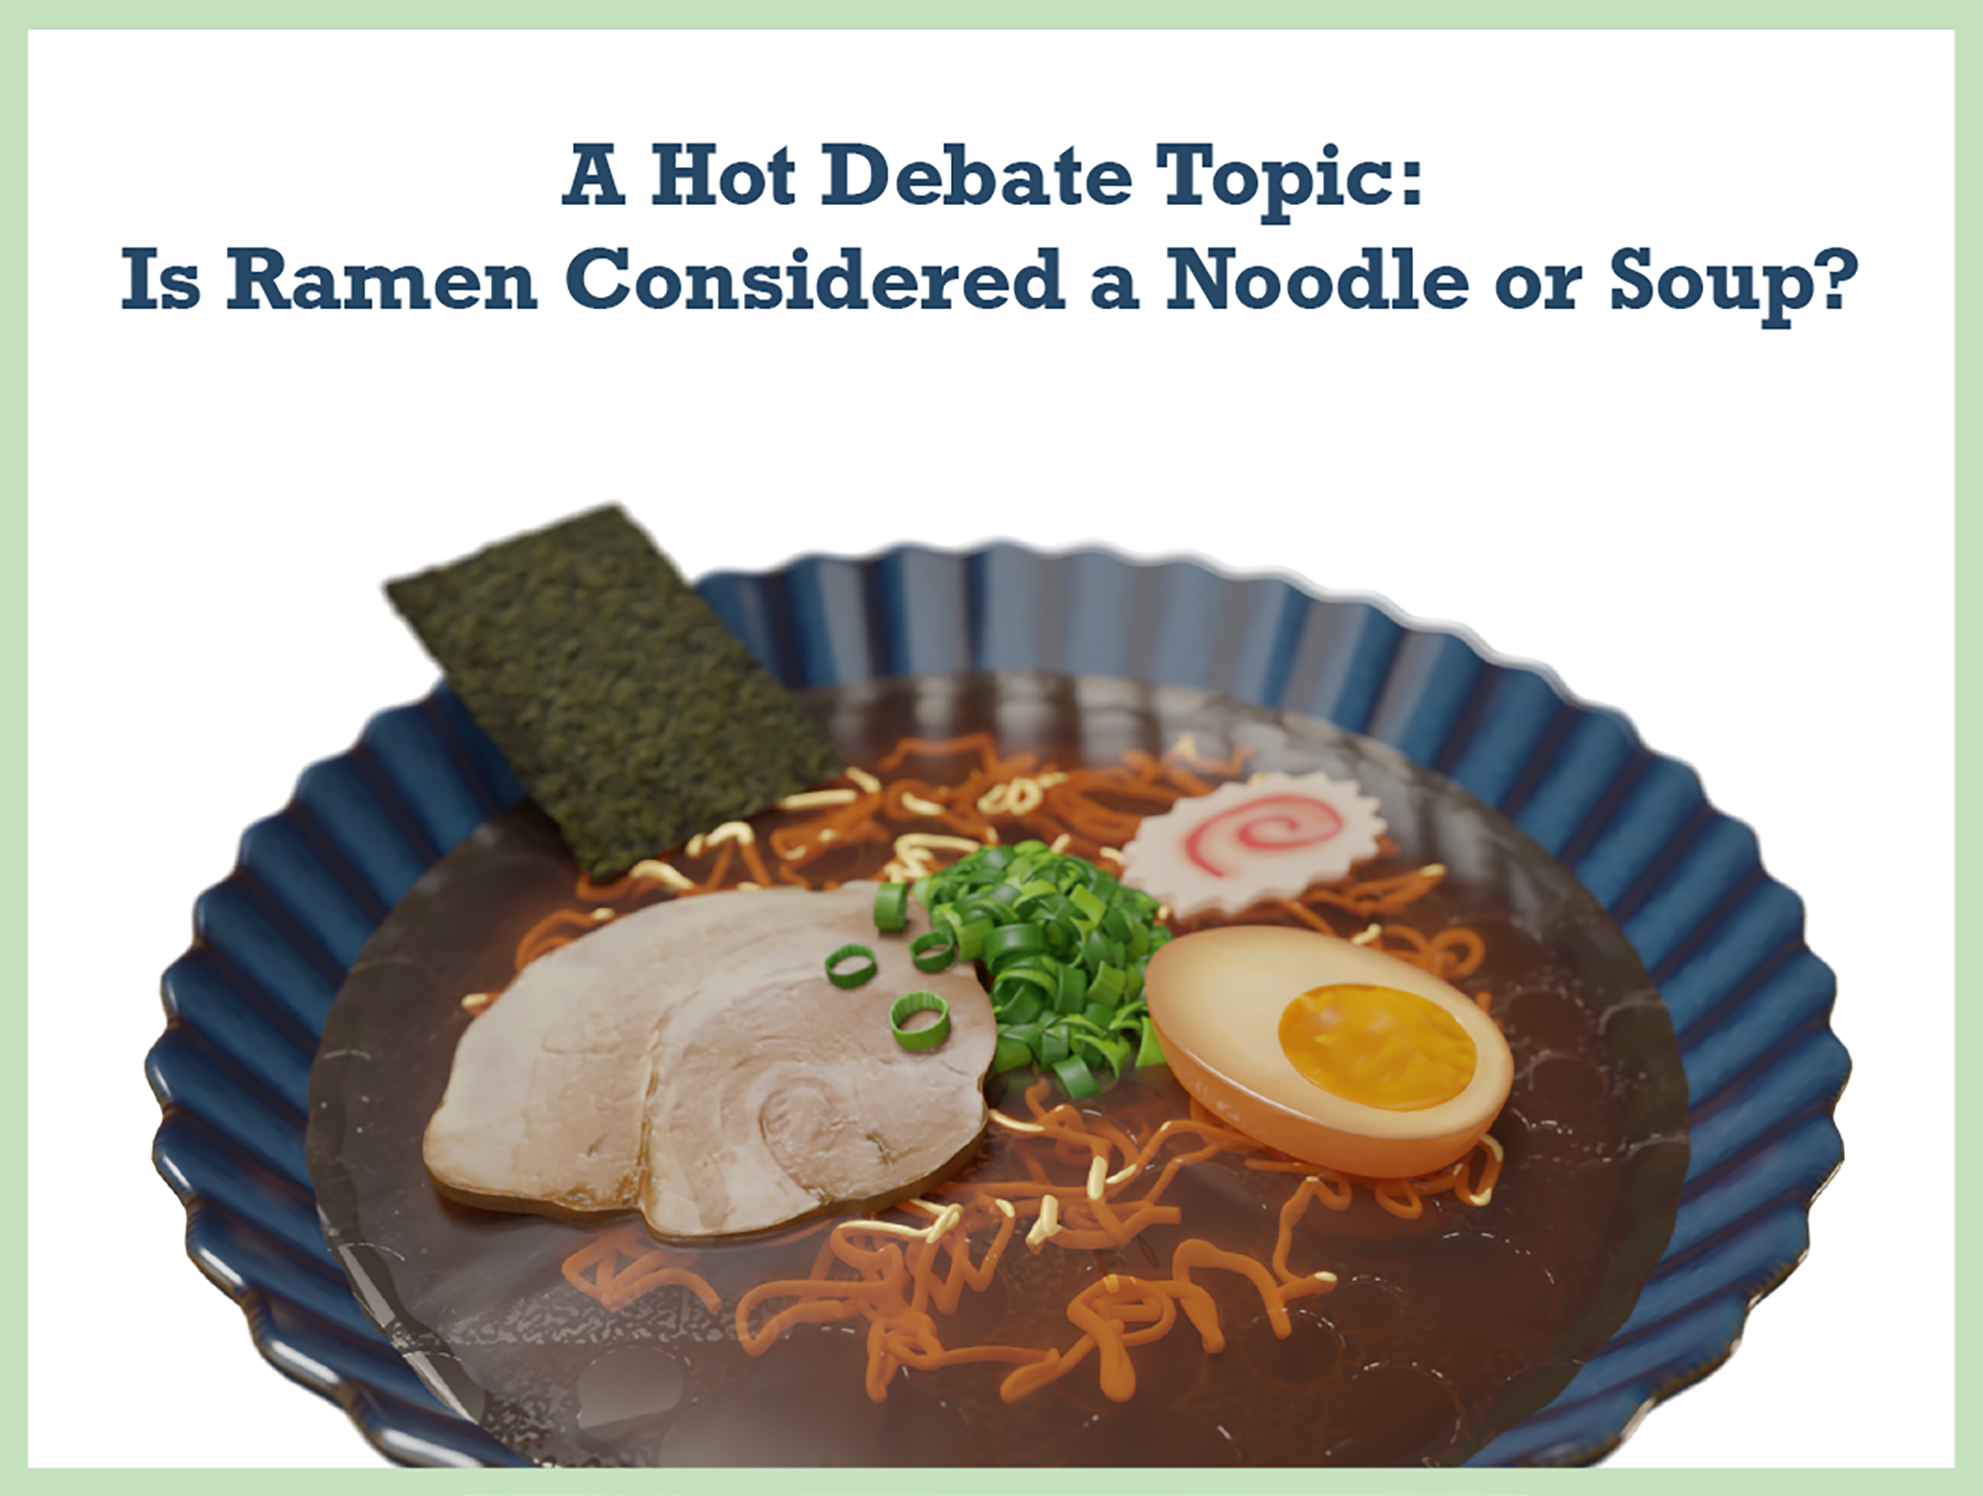 A Hot Debate Topic: Is Ramen Considered a Noodle or Soup?